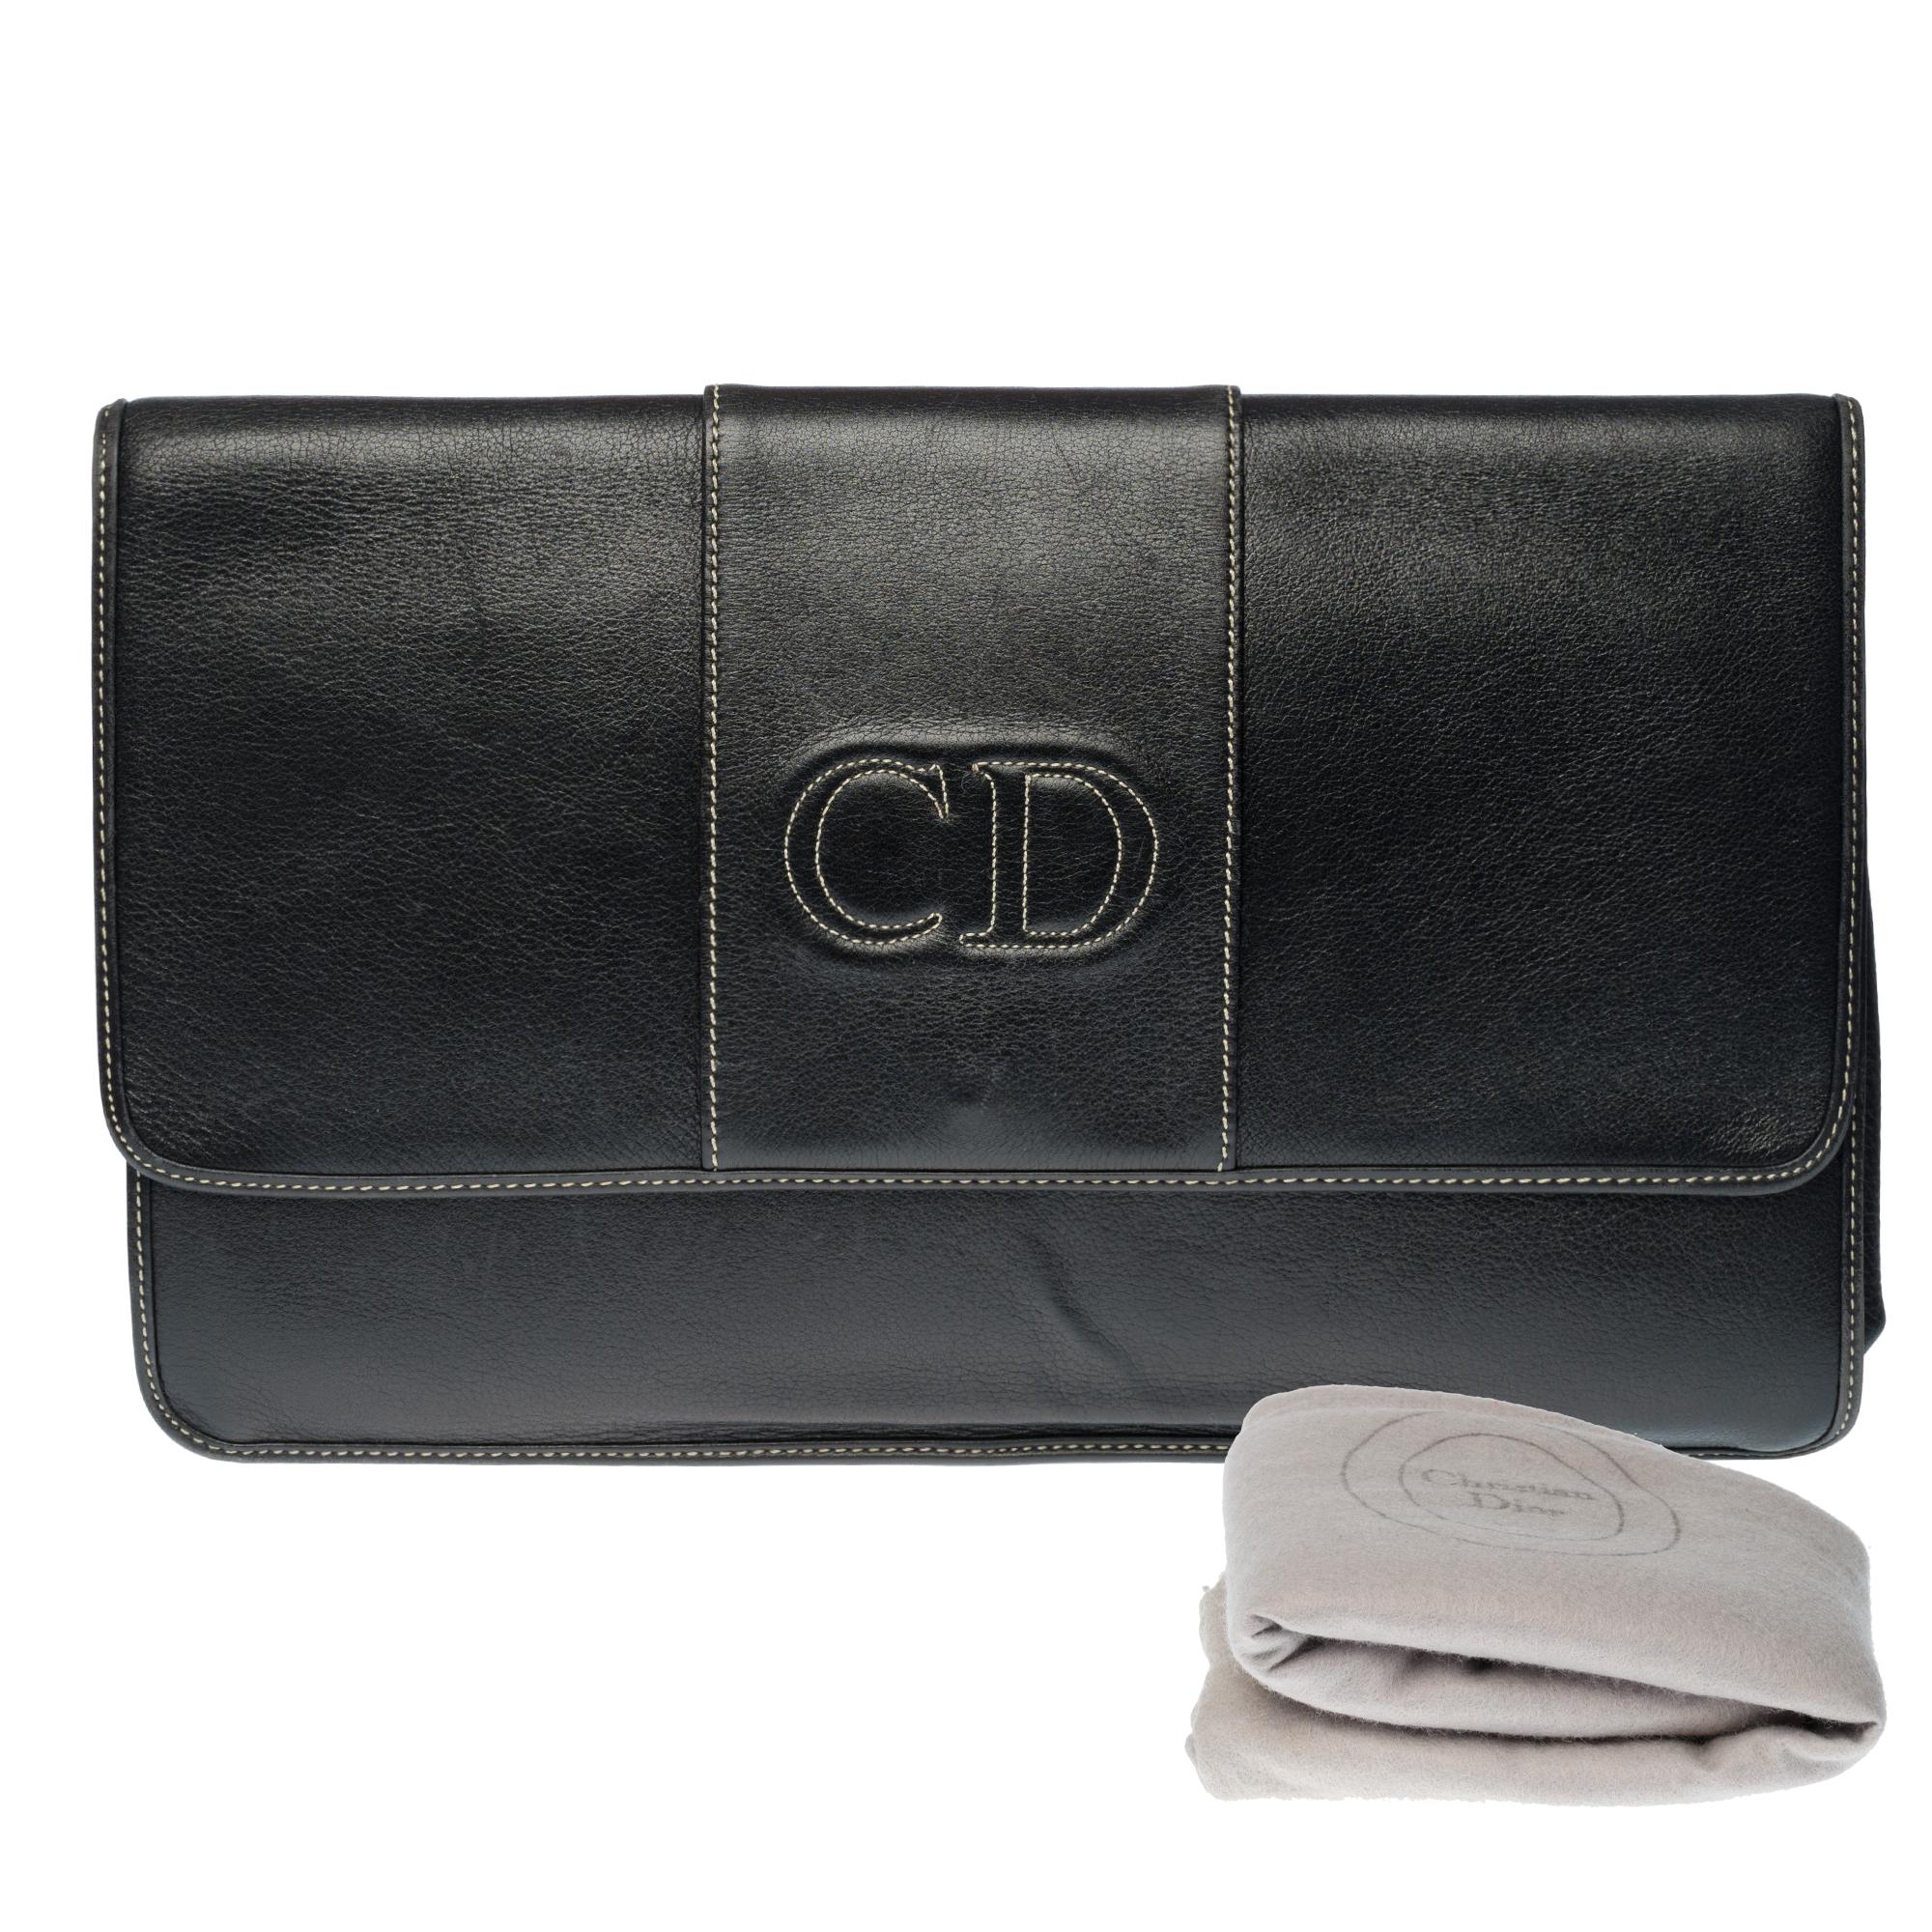 Beautiful Christian Dior Clutch in black leather For Sale 5